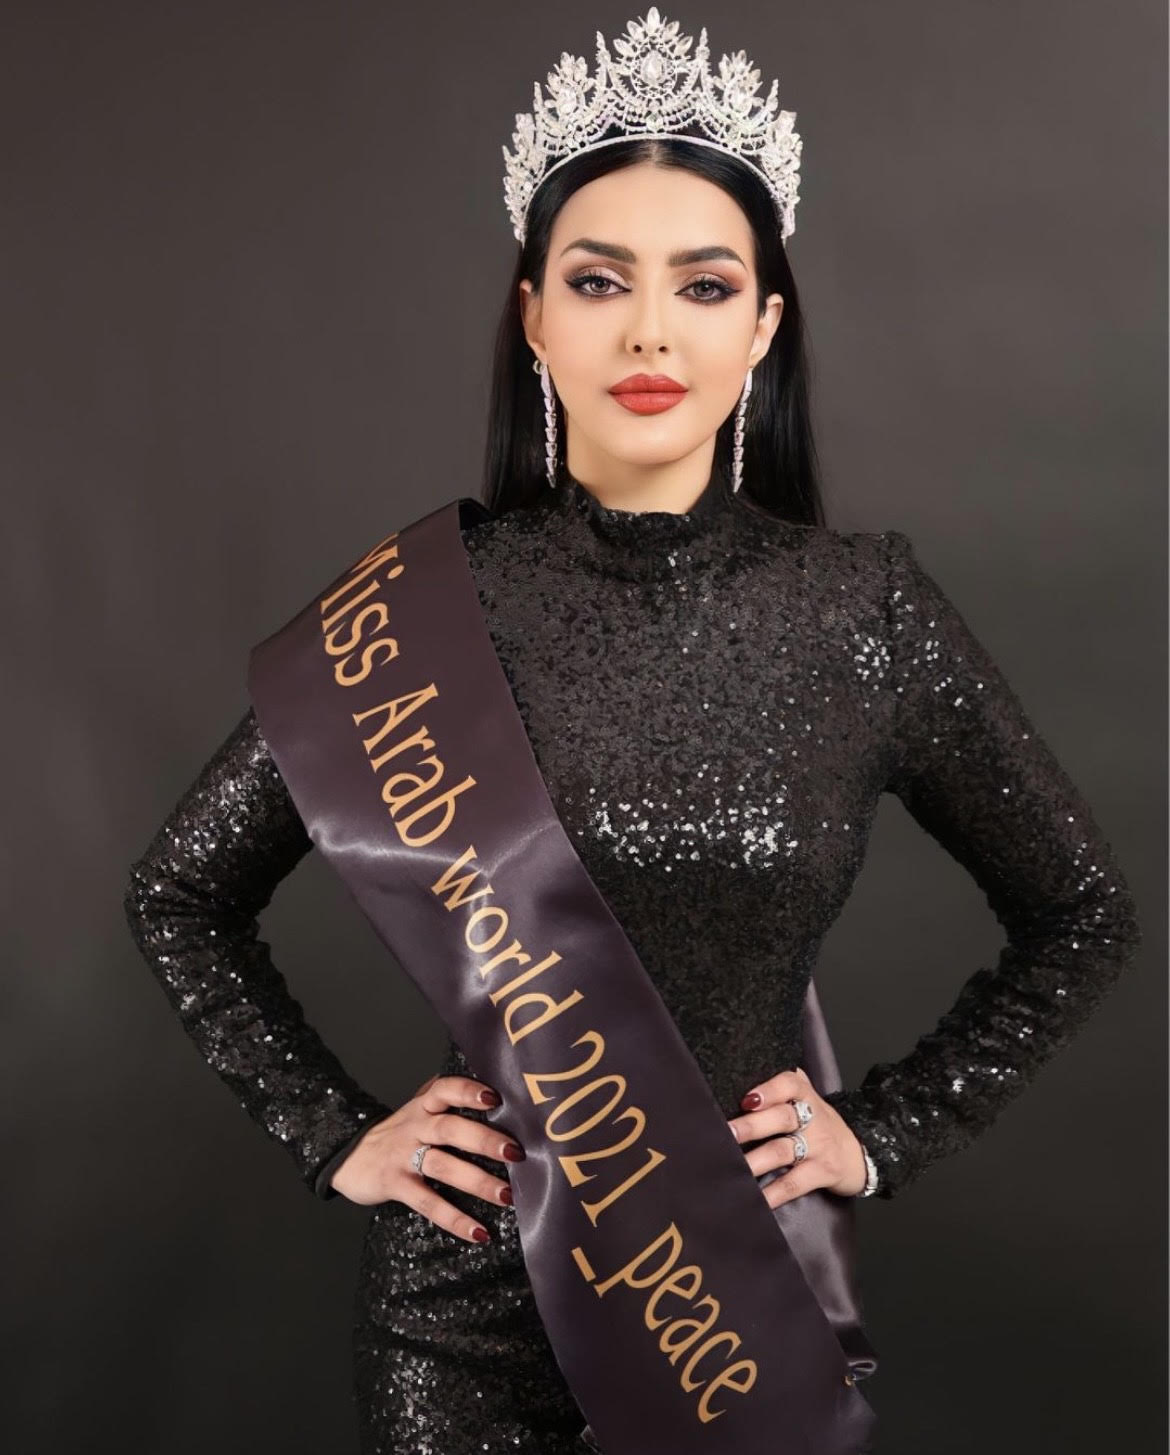 Who is Rumy Alqahtani? Saudi Arabia's First Miss Universe Participant